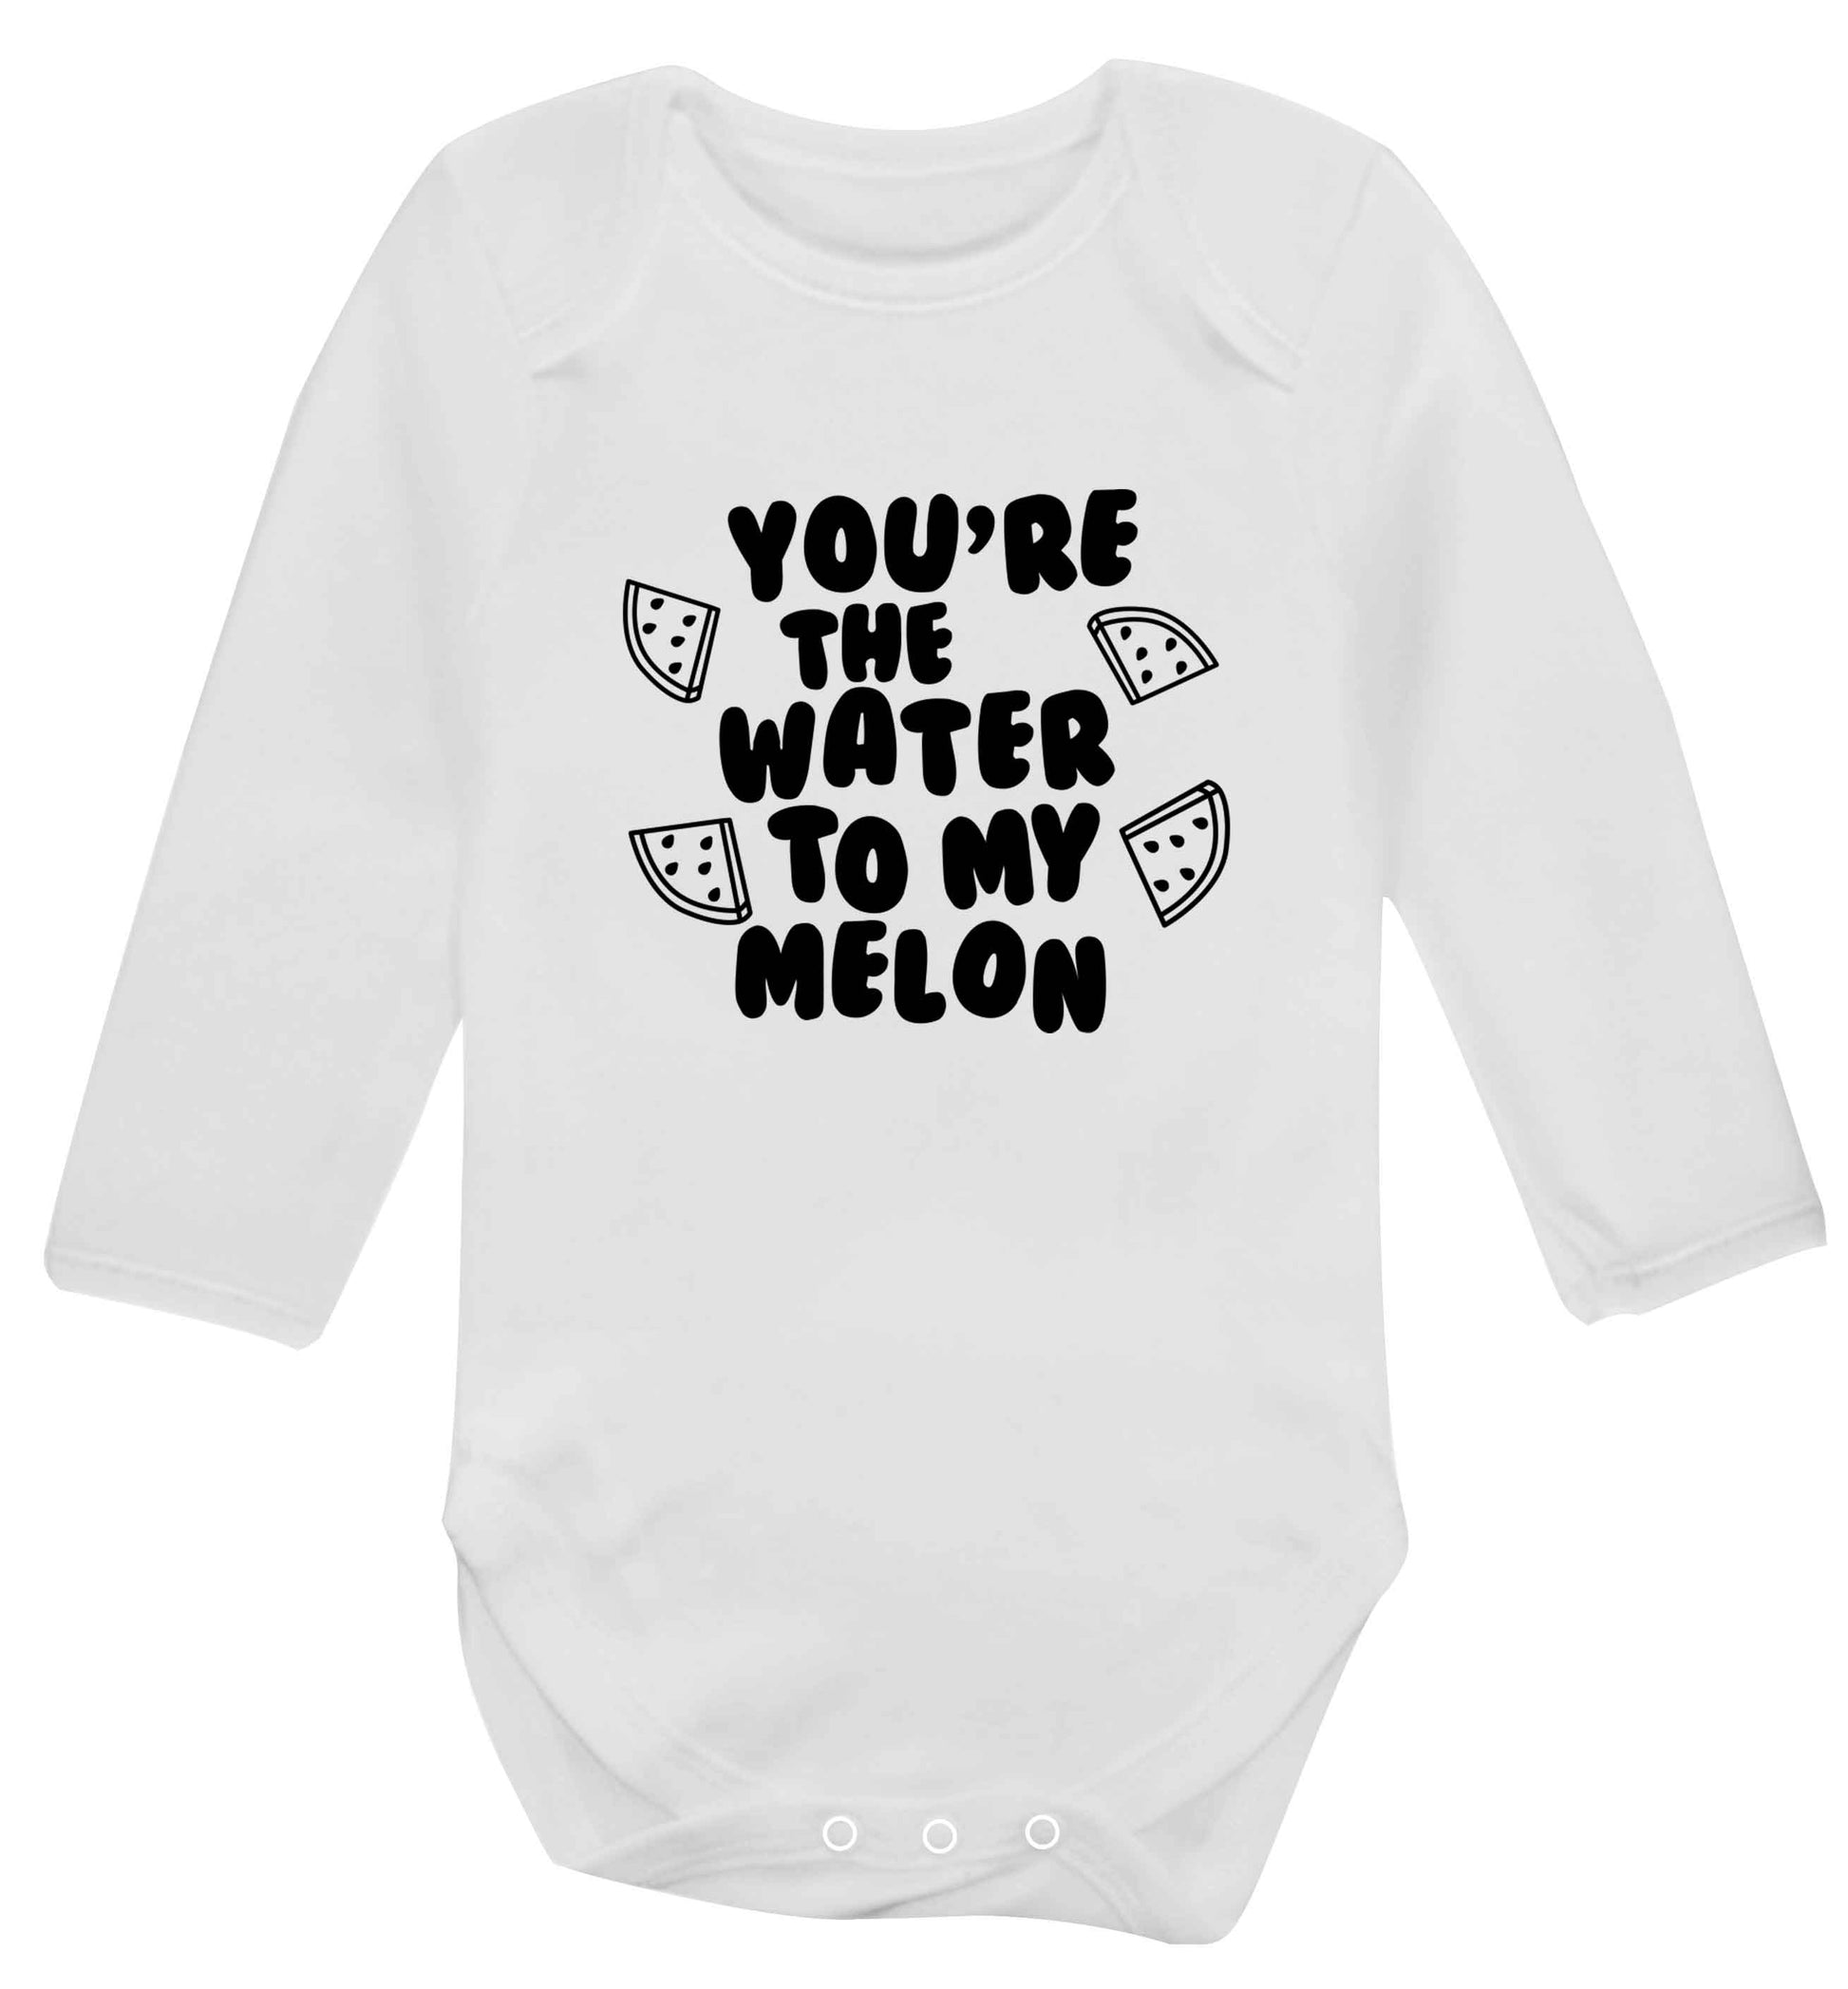 You're the water to my melon baby vest long sleeved white 6-12 months